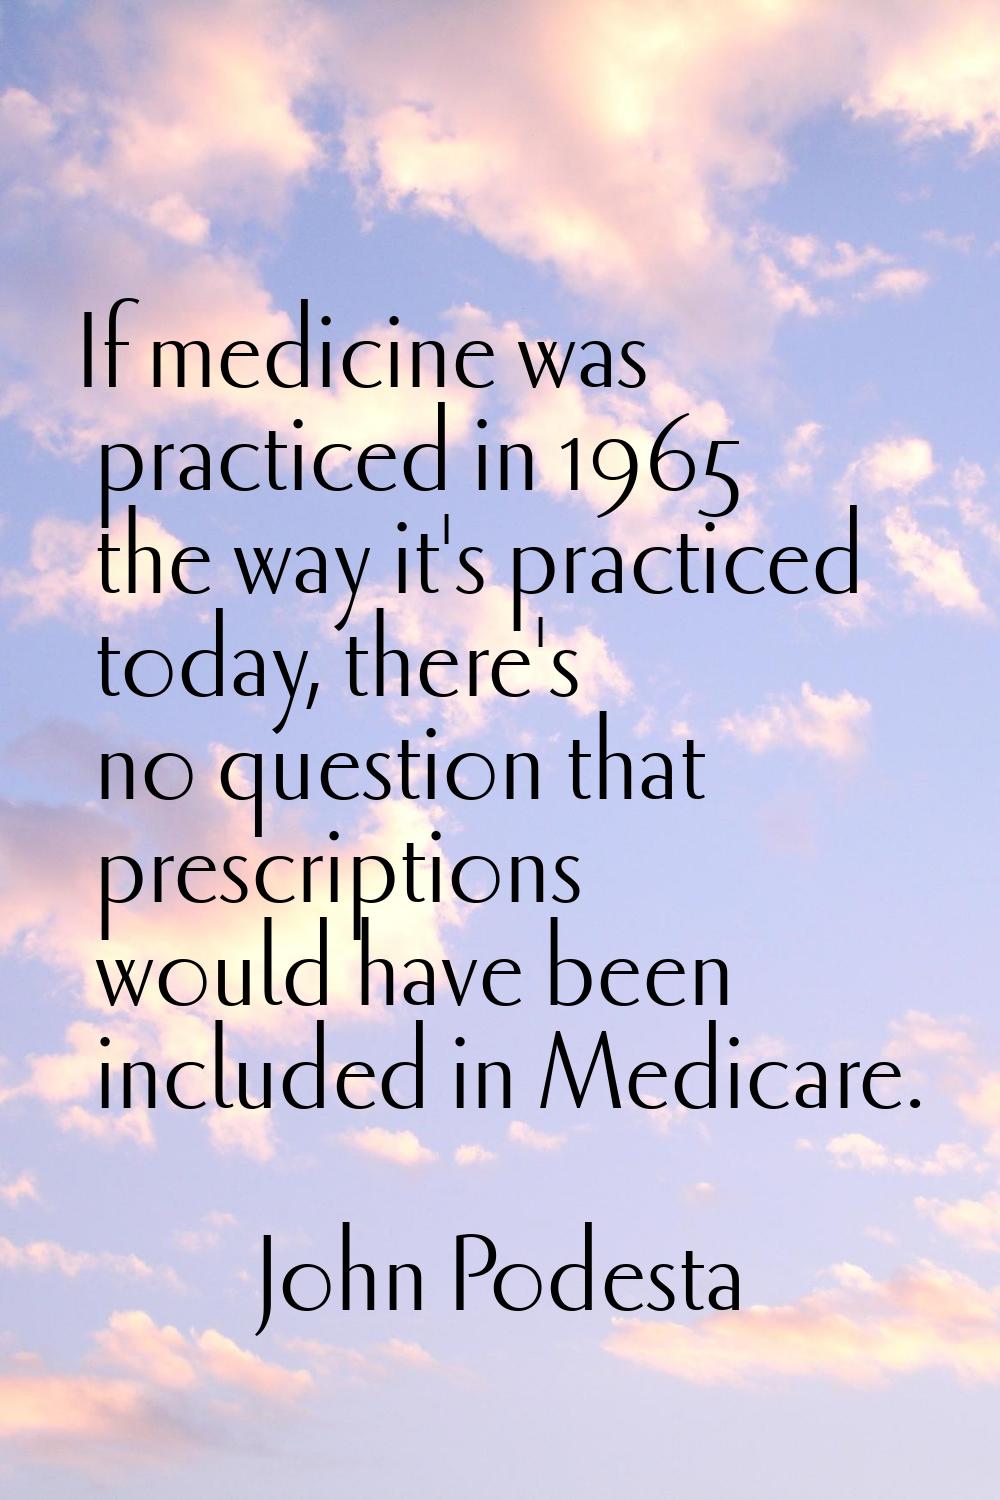 If medicine was practiced in 1965 the way it's practiced today, there's no question that prescripti